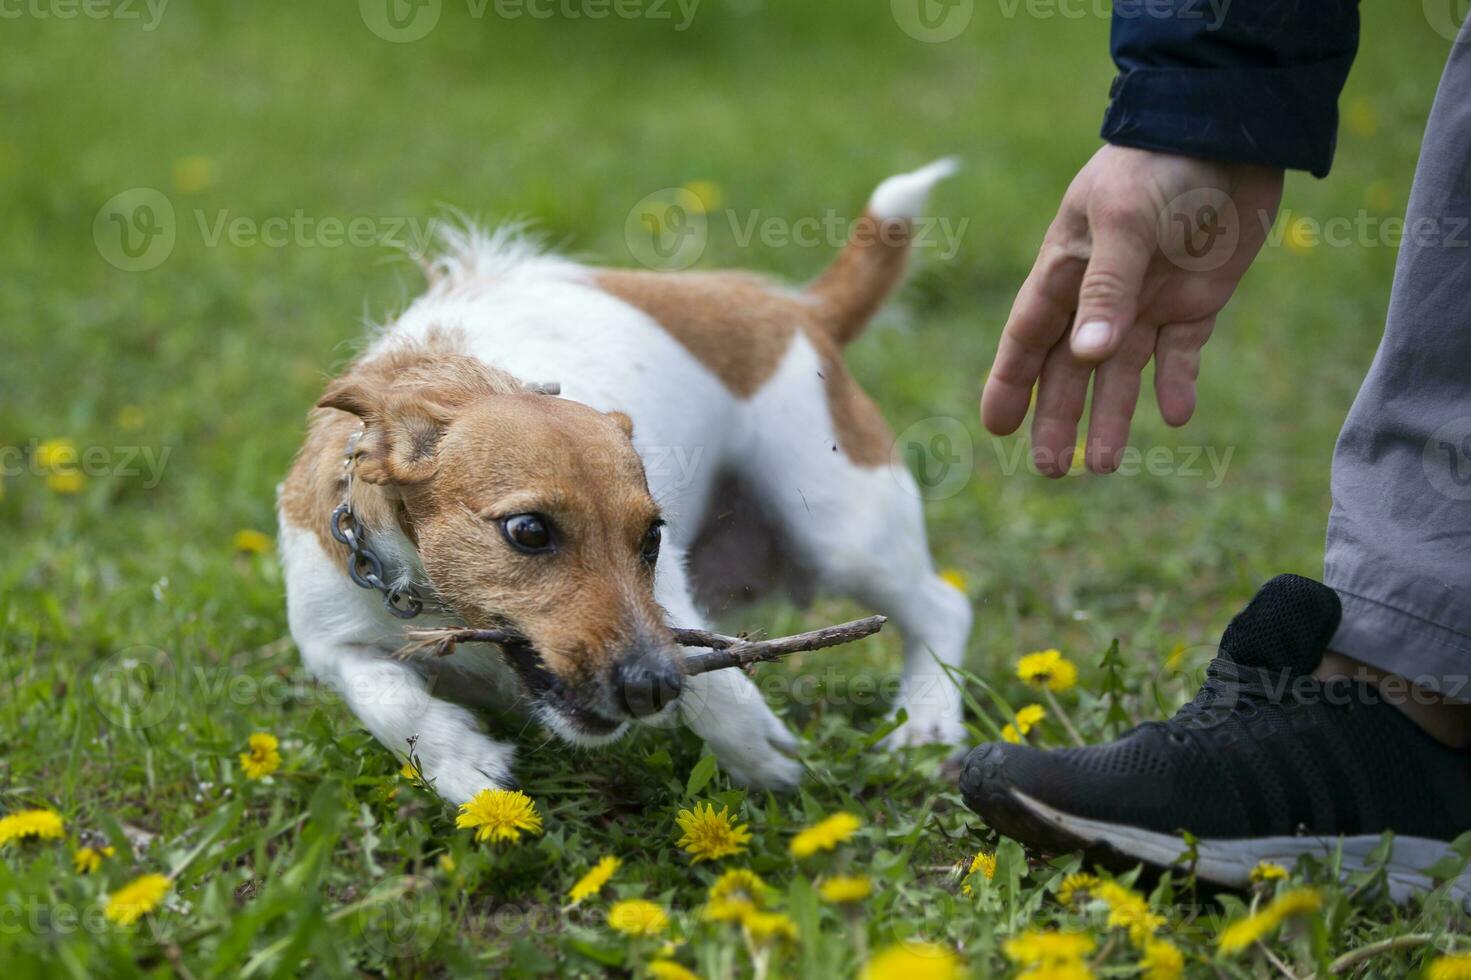 Funny dog jack russell breed plays with a stick on the summer lawn. Beautiful dog in nature. photo